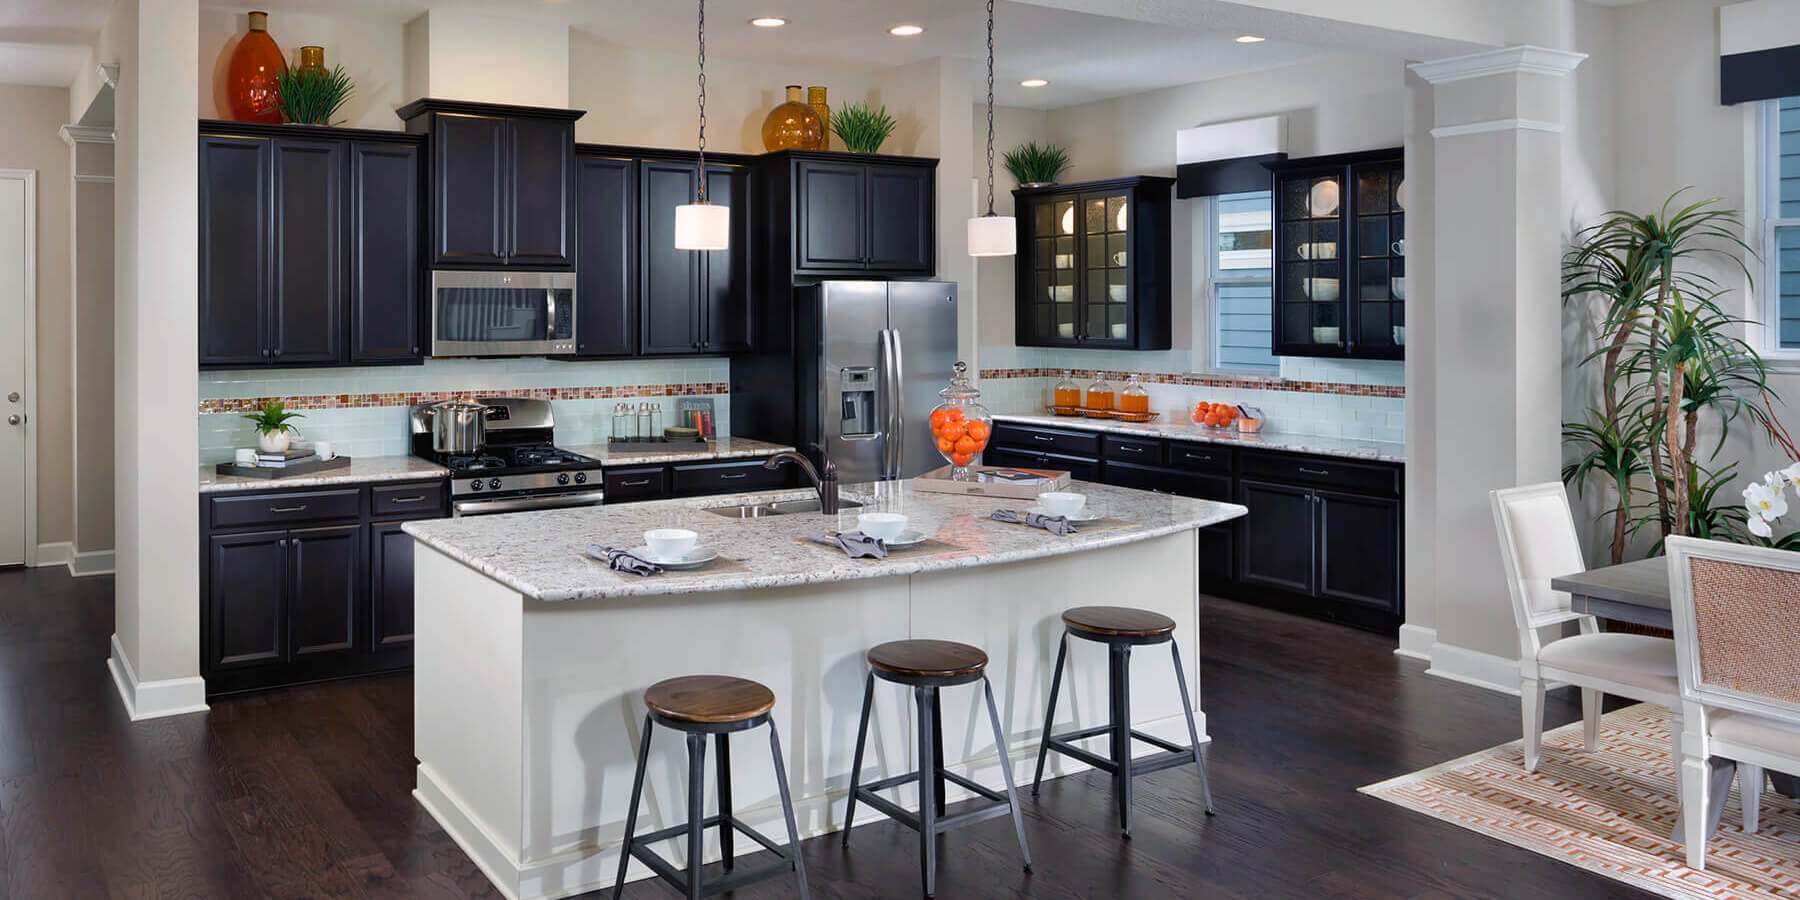 New Homes for Sale with Beautifully Designed Kitchens